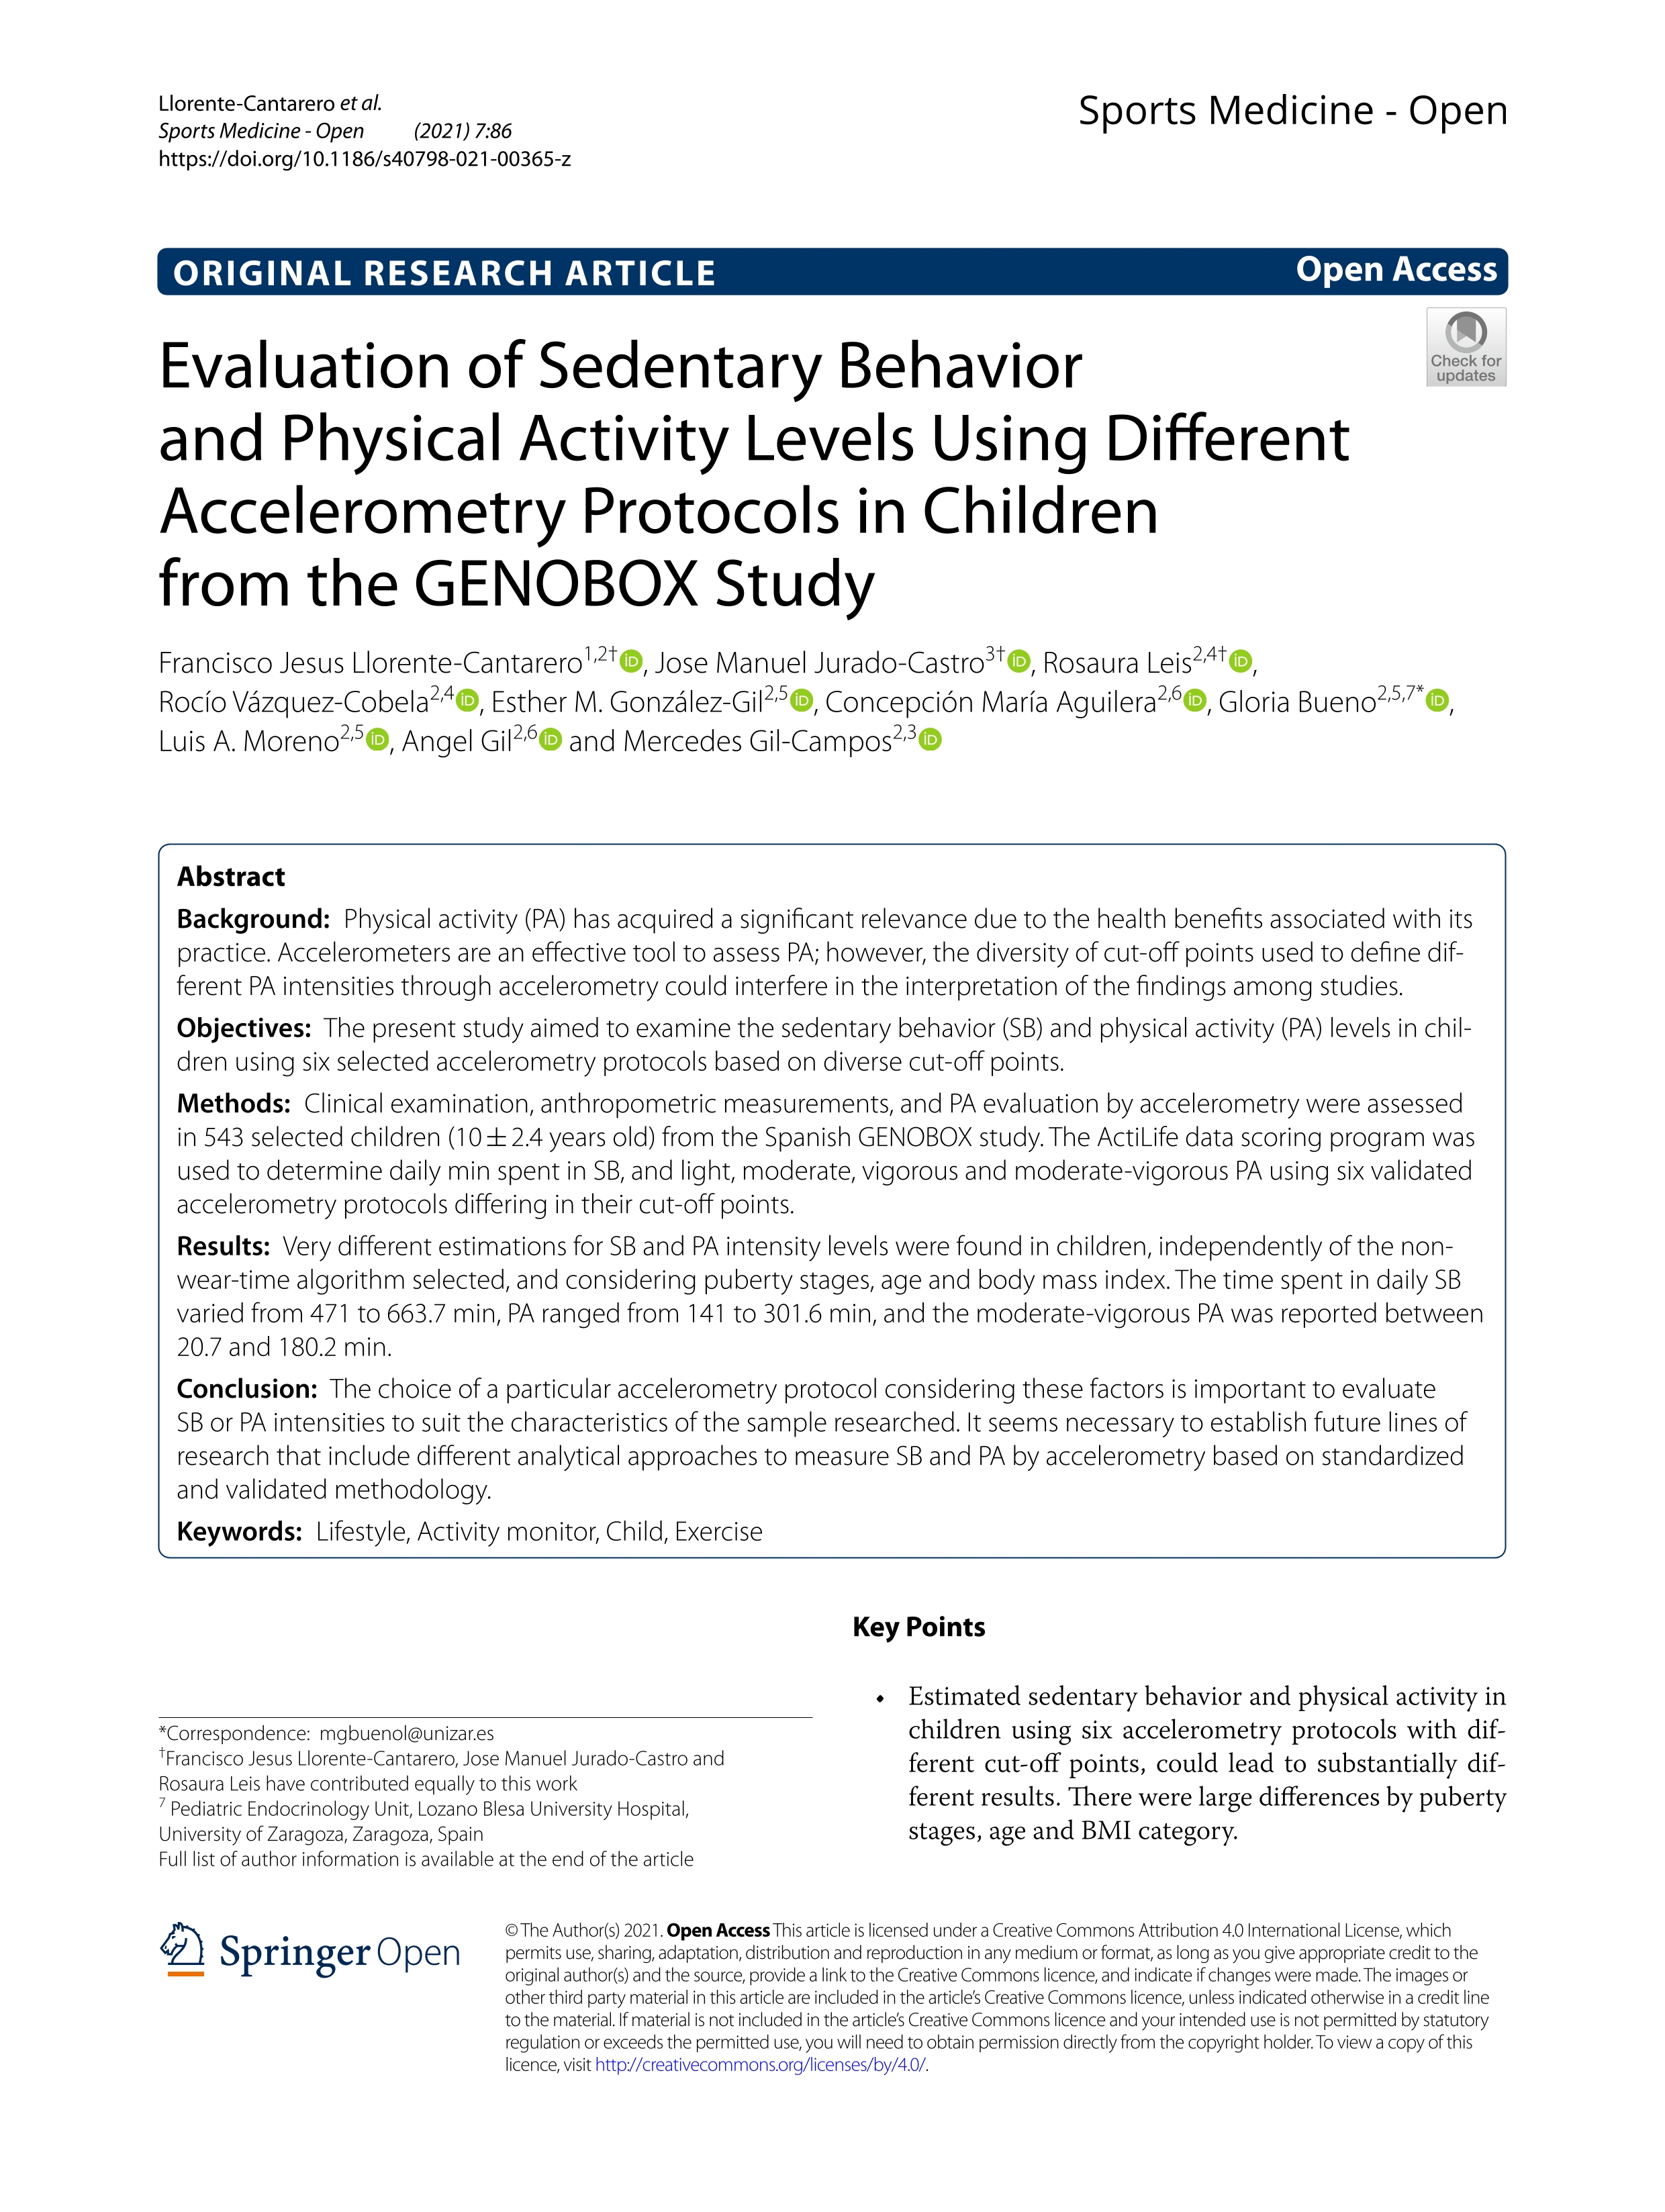 Evaluation of Sedentary Behavior and Physical Activity Levels Using Different Accelerometry Protocols in Children from the GENOBOX Study